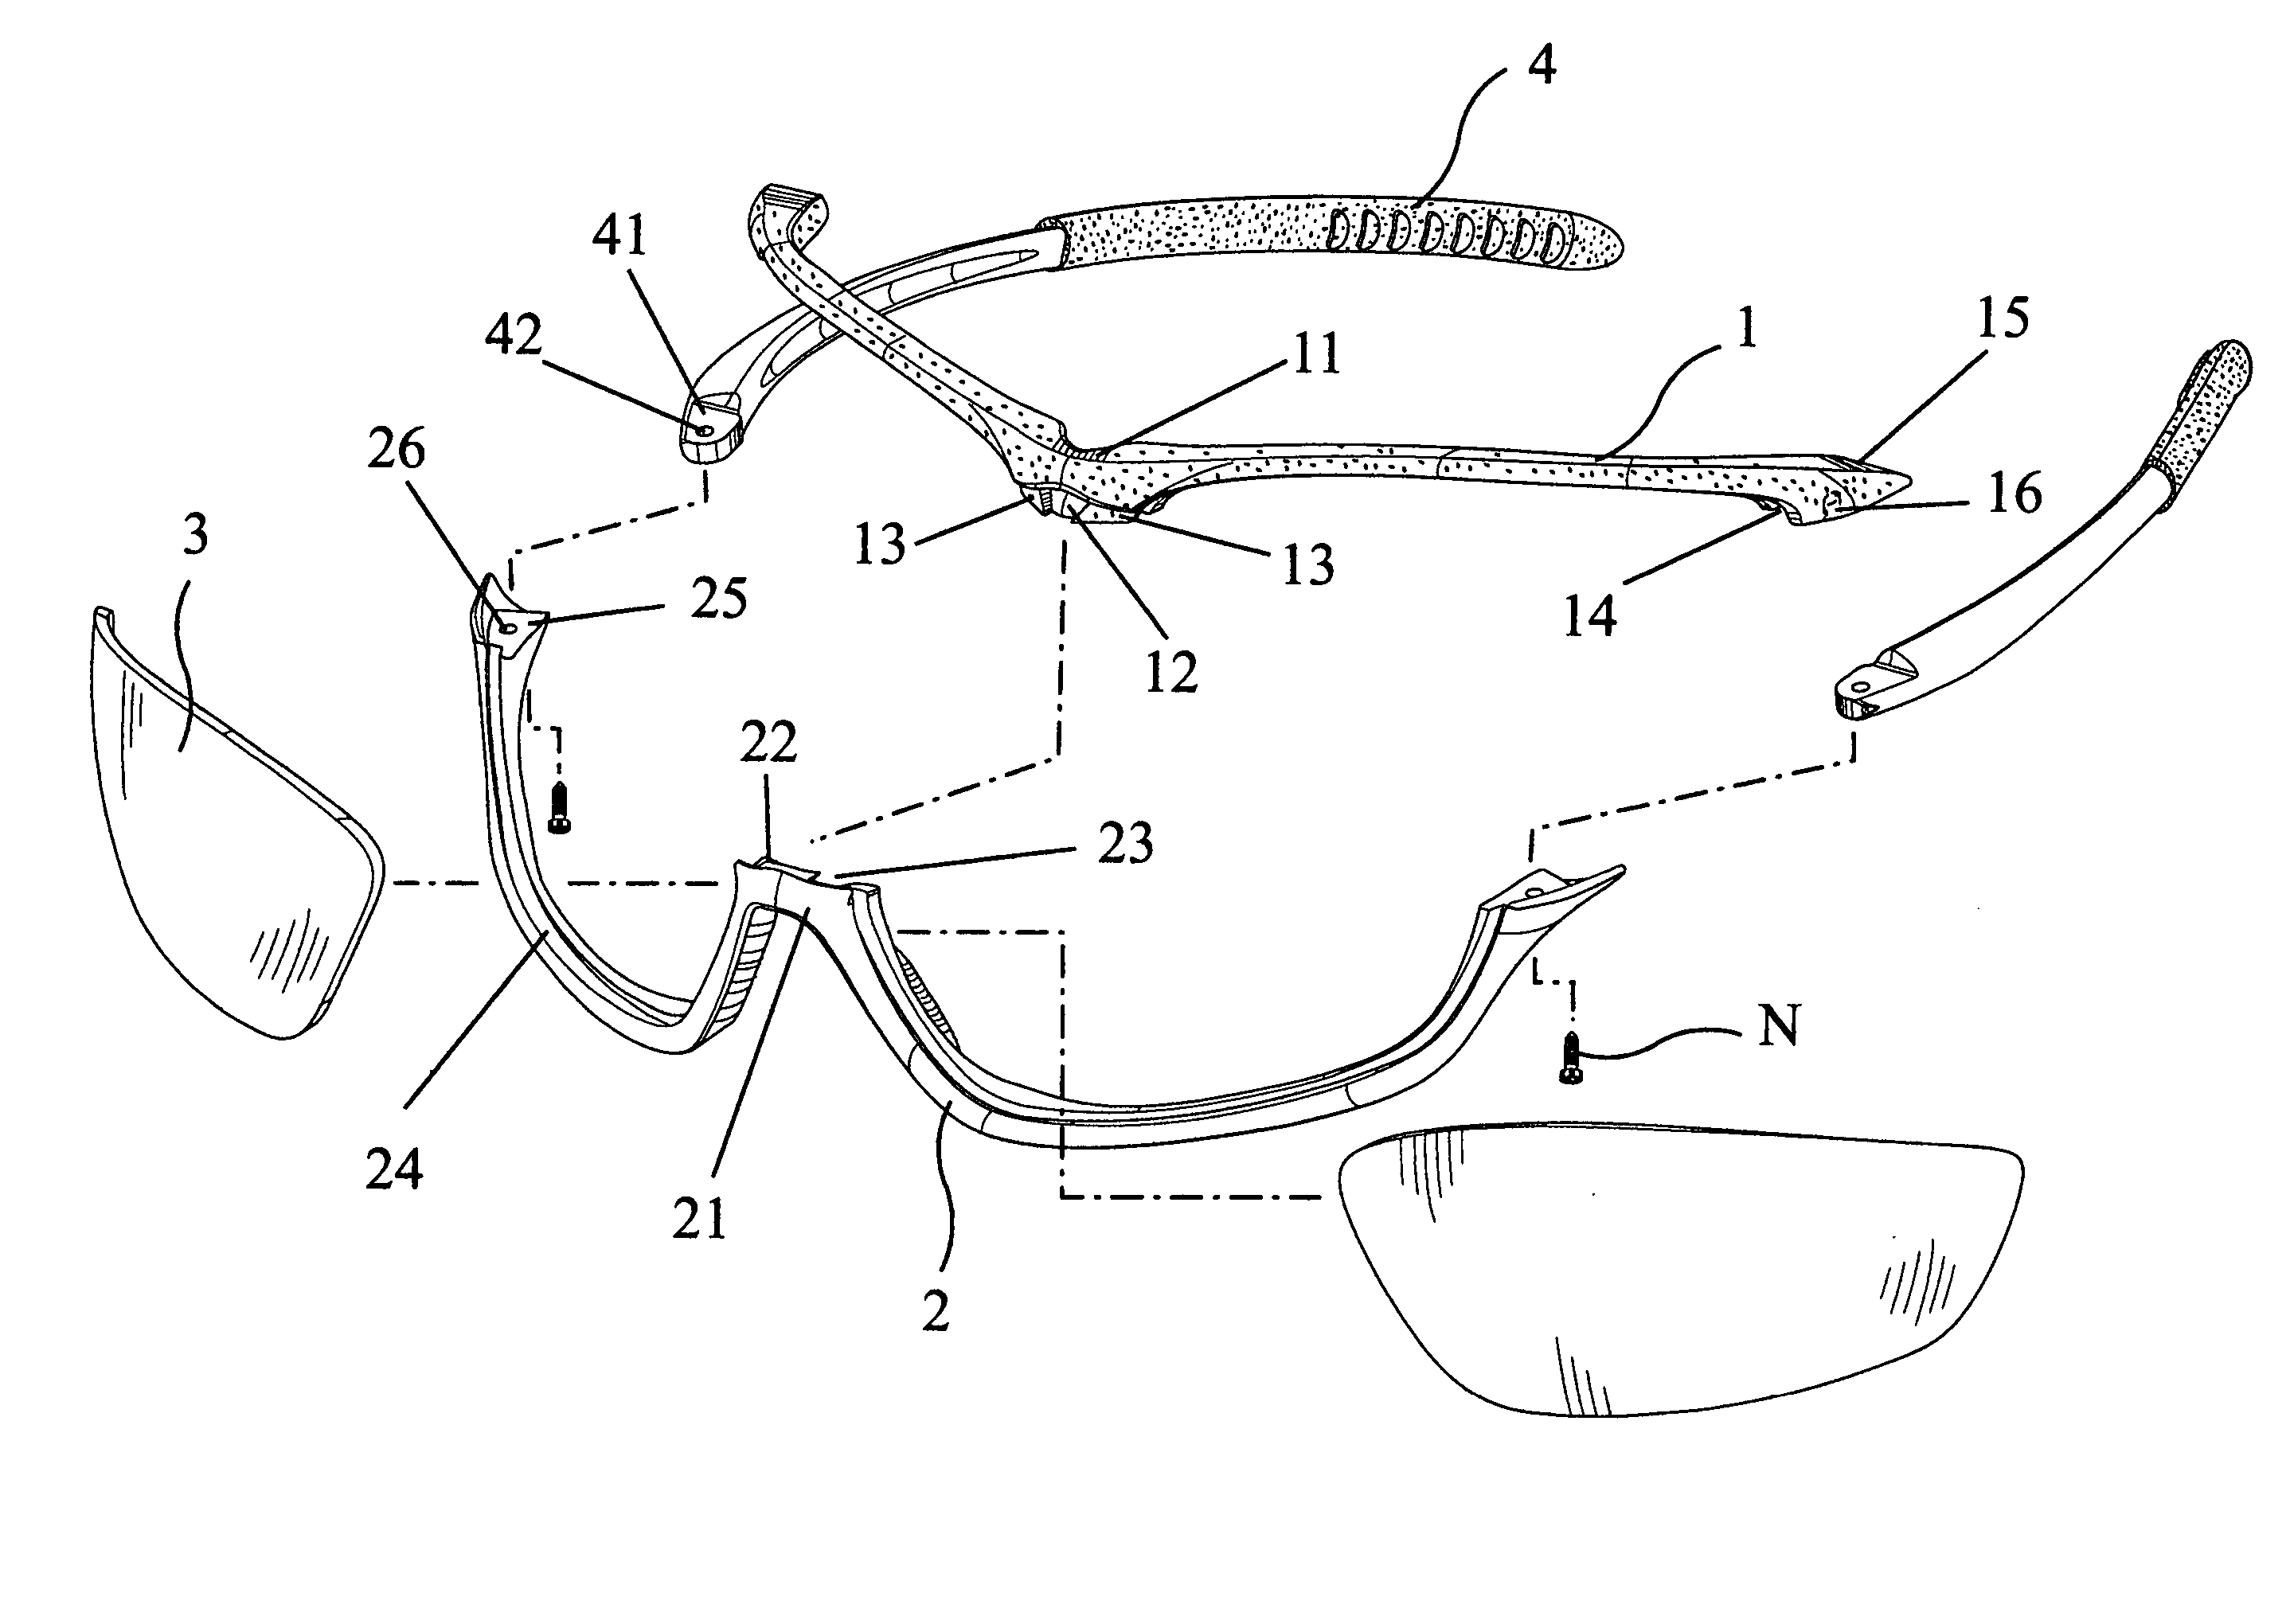 Eyeglass assembly and coupling system